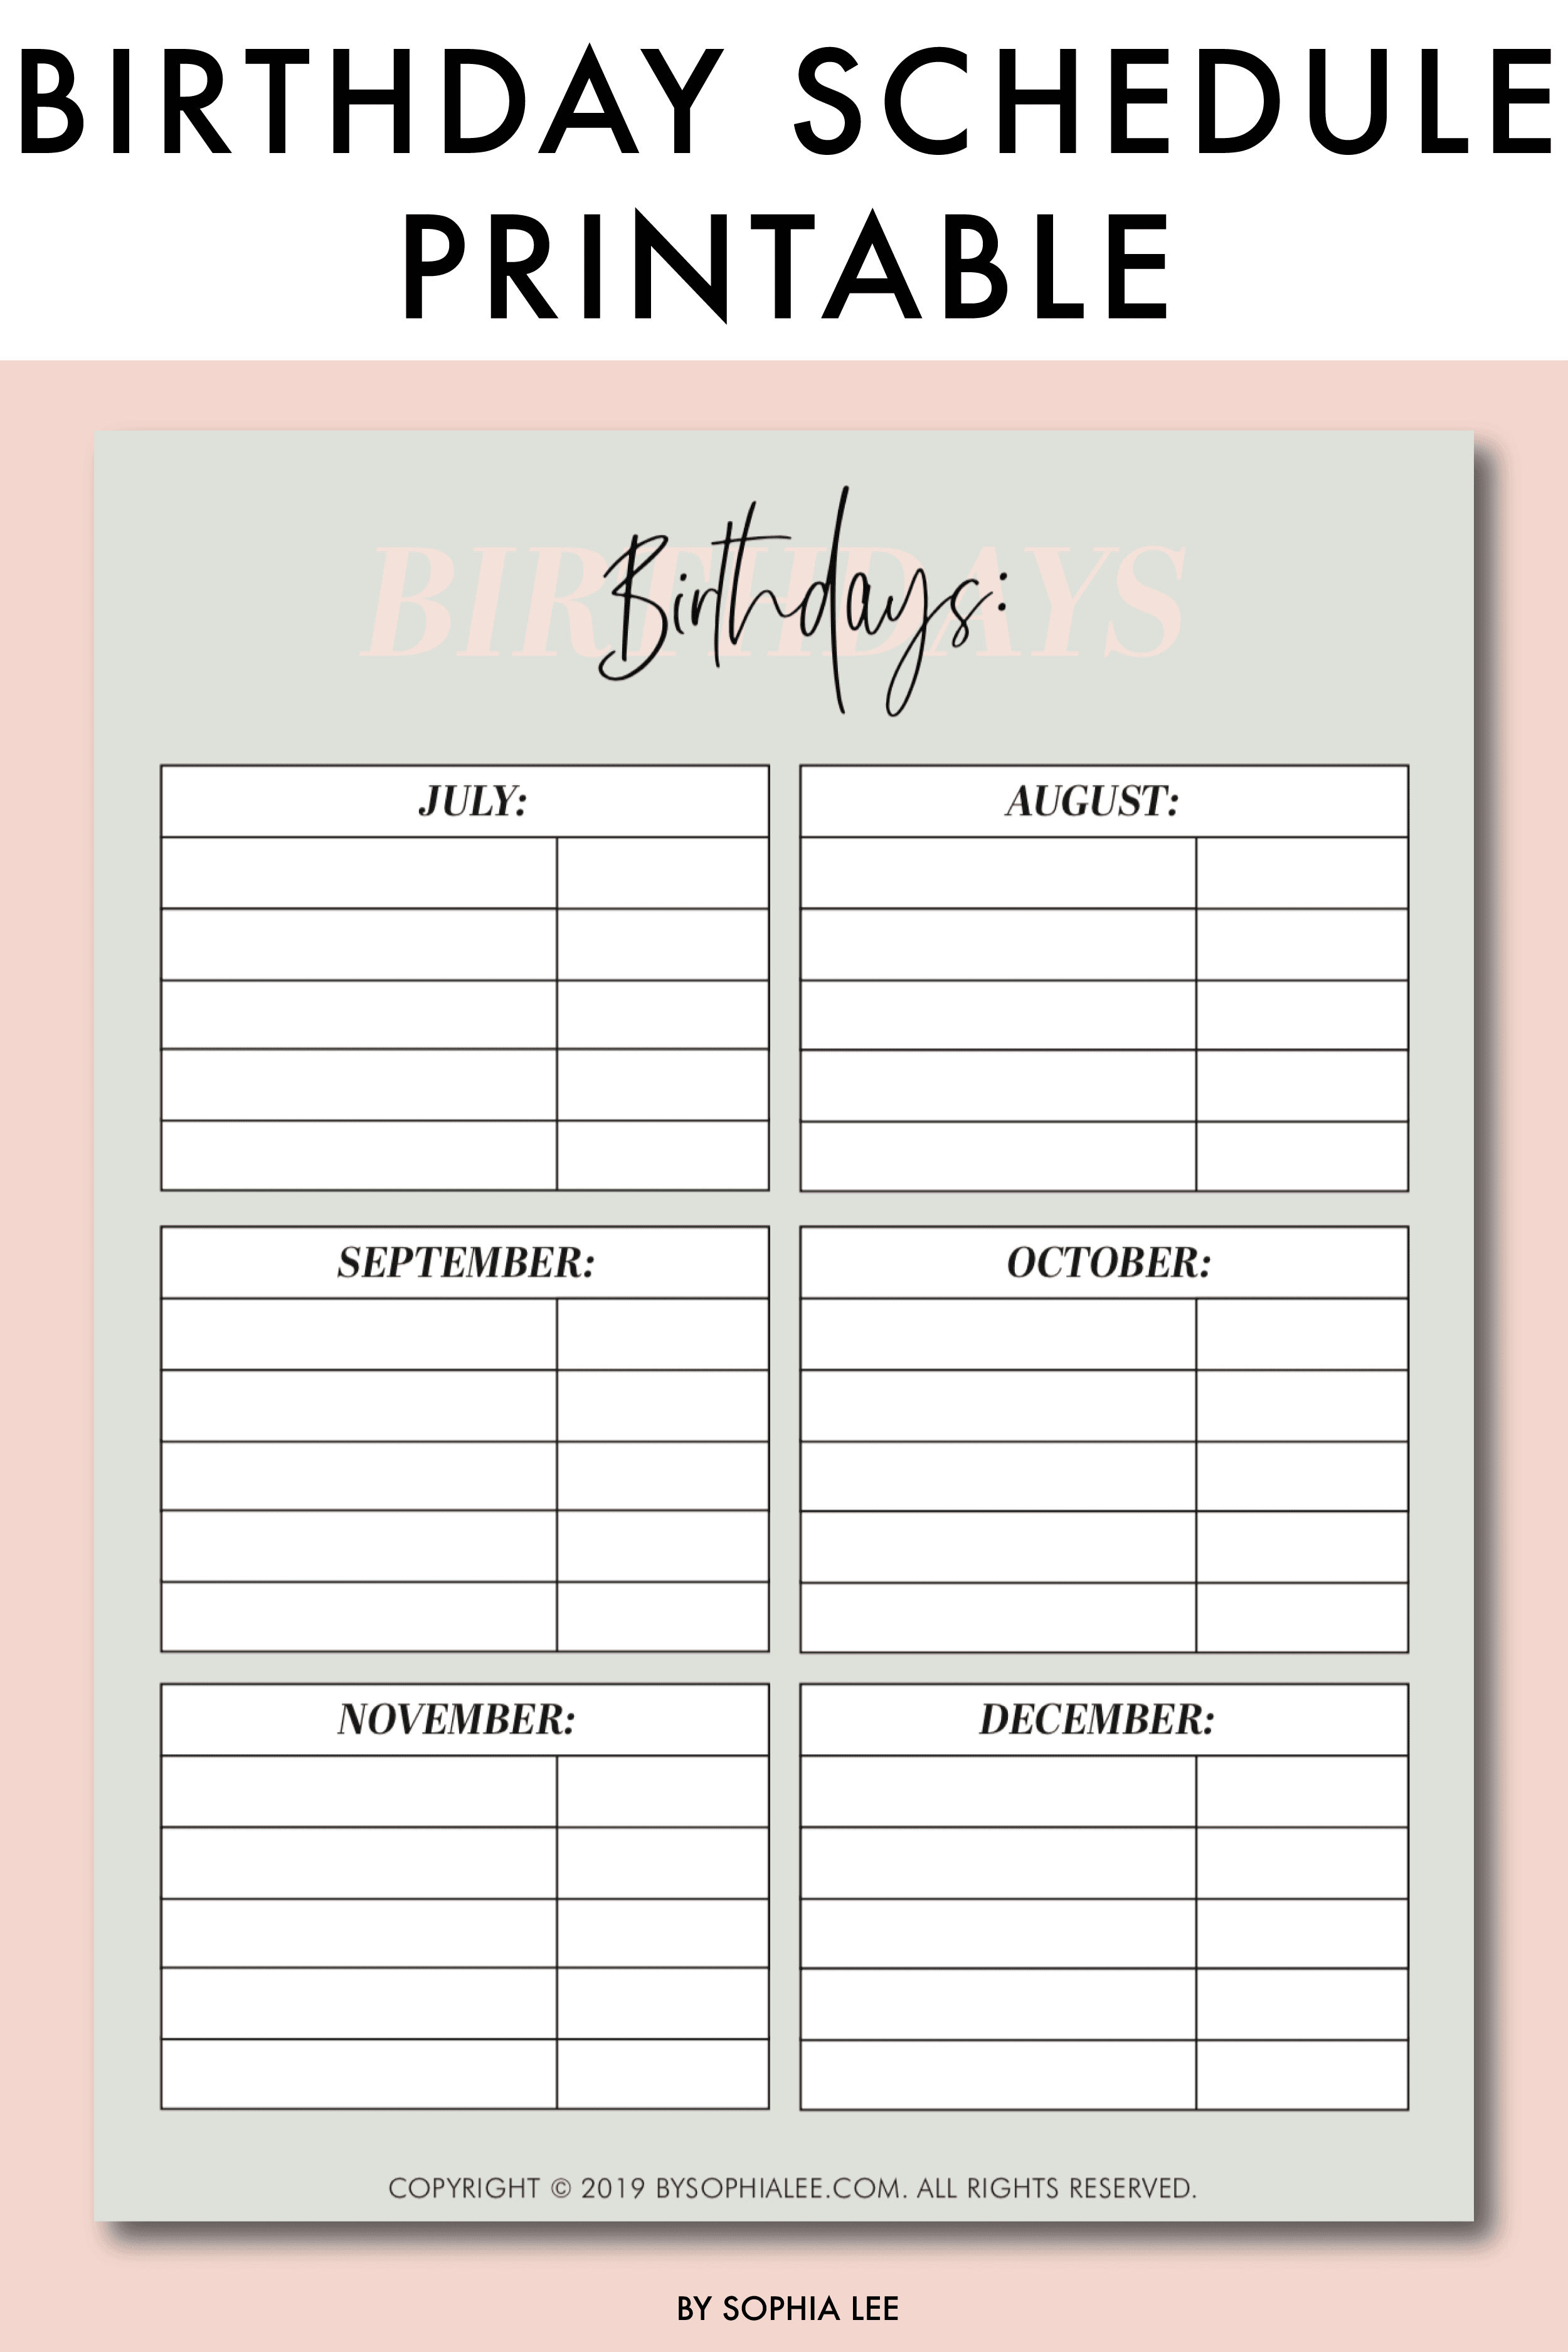 13 Free Organization Printables That Will Change Your Life By Sophia Lee